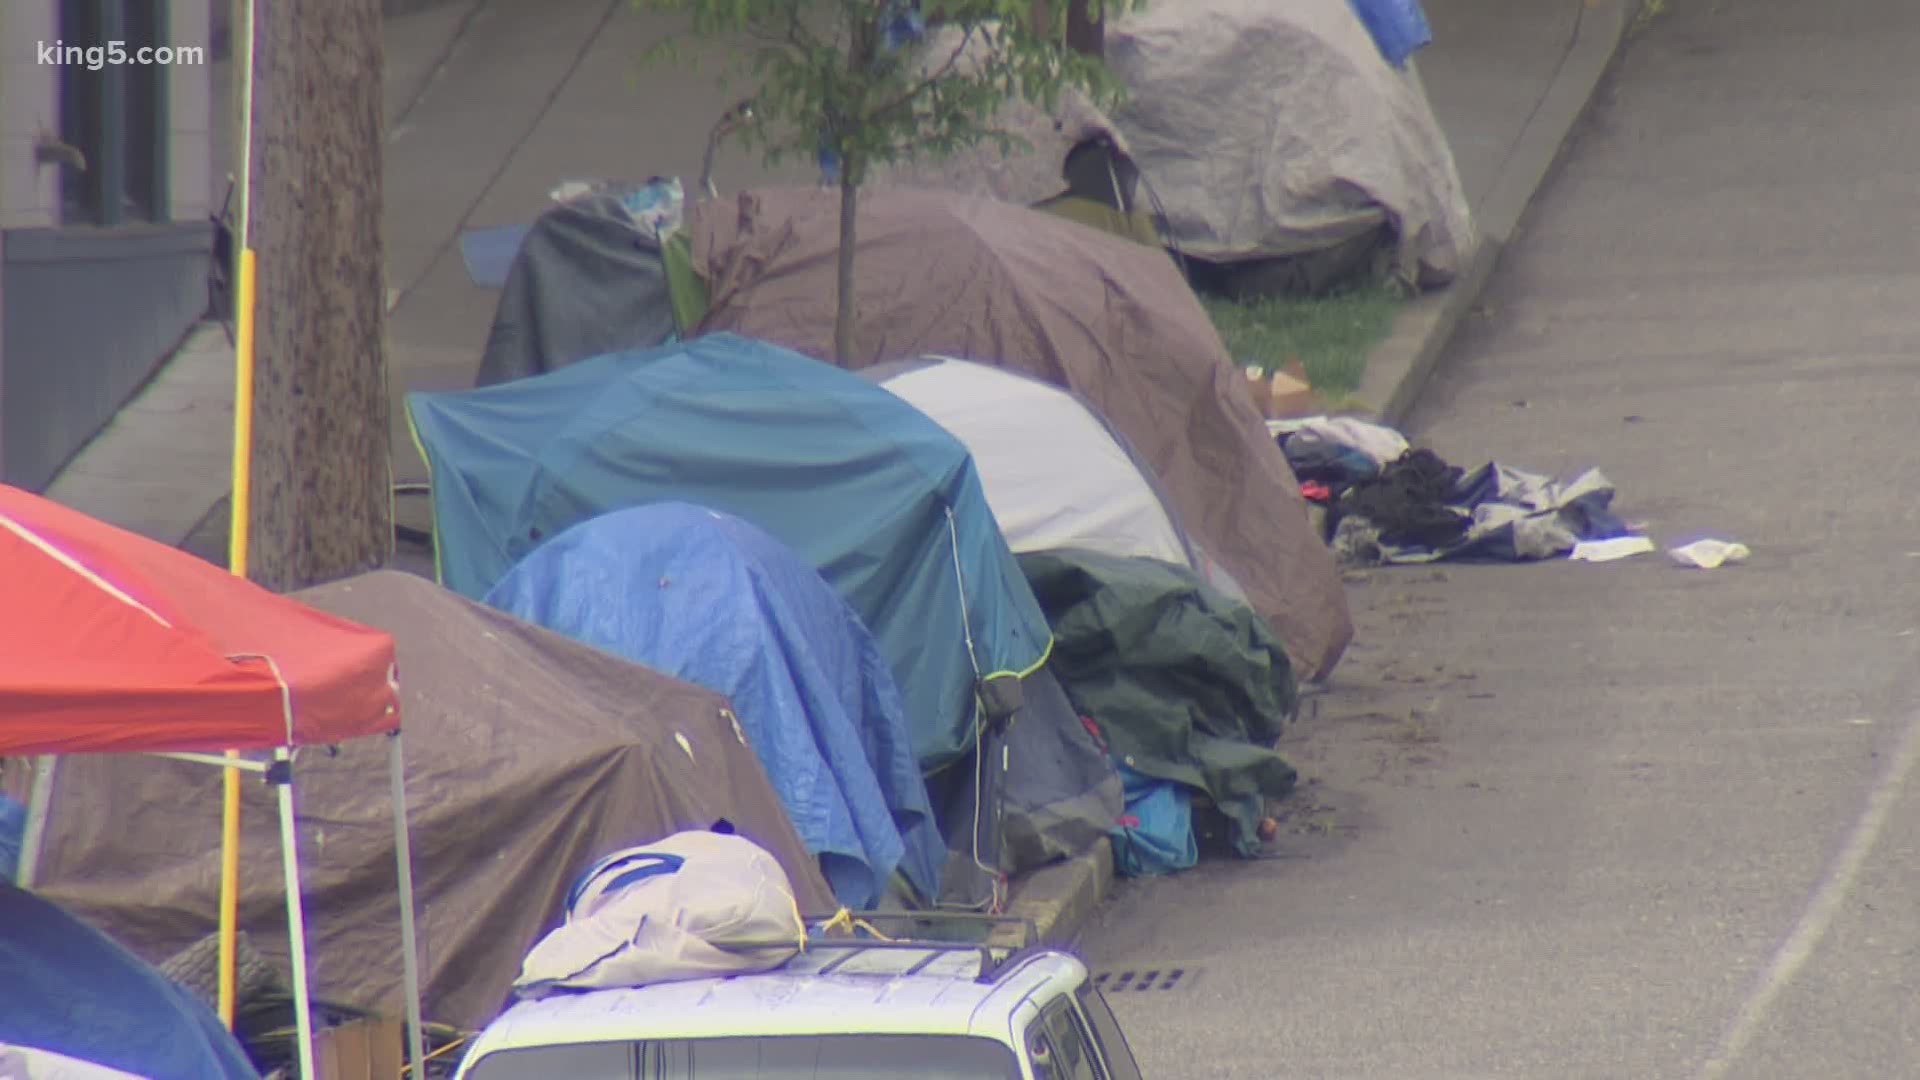 New city legislation from three council members cites COVID concerns in a proposal to limit funding for removing camps in the city's public areas.